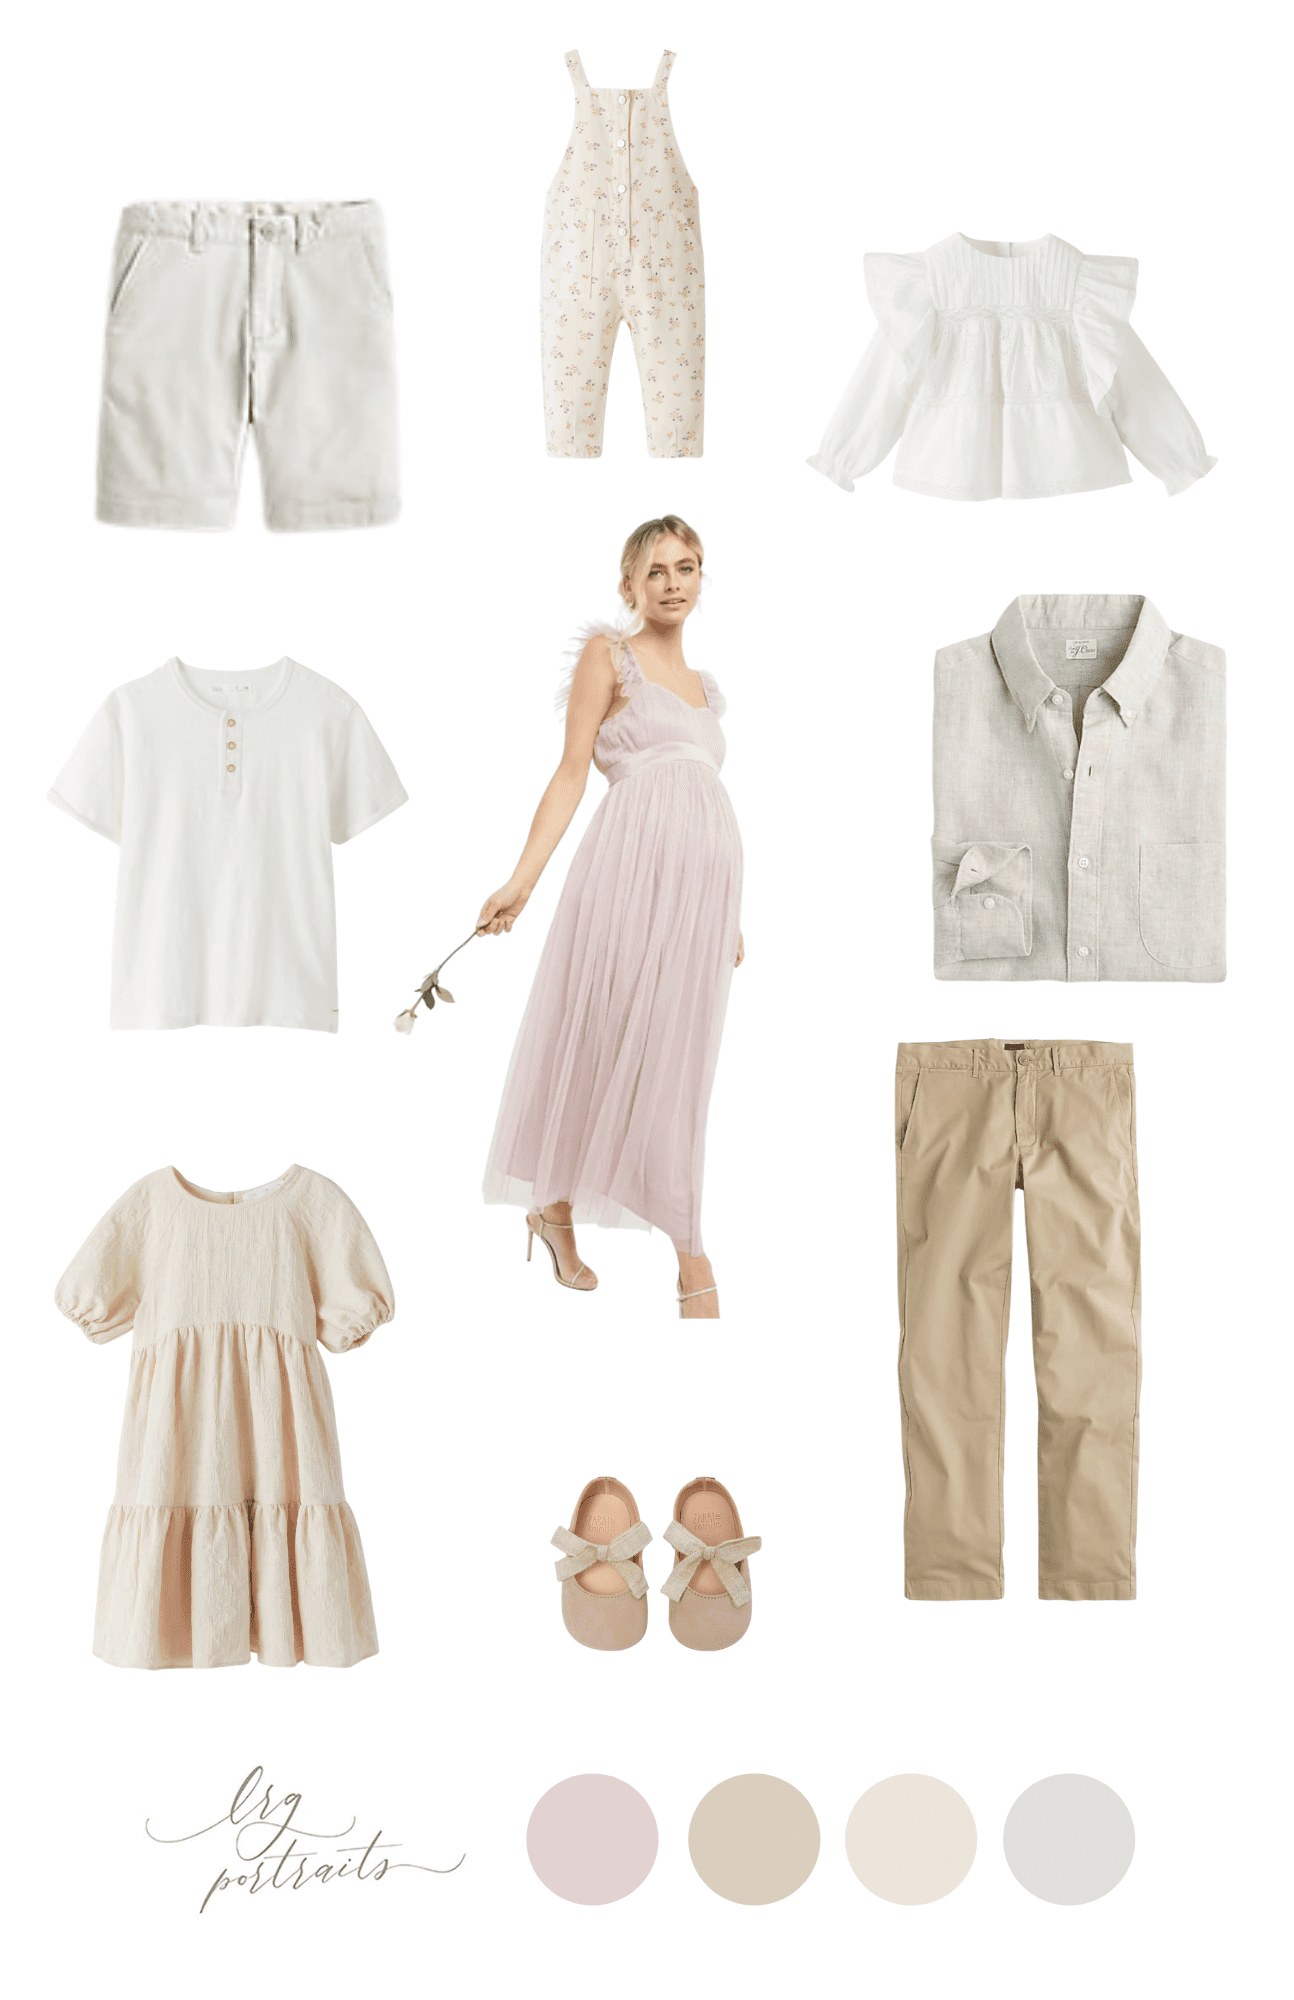 Outfit inspiration in pink, tan, blush and off-white by LRG Portraits